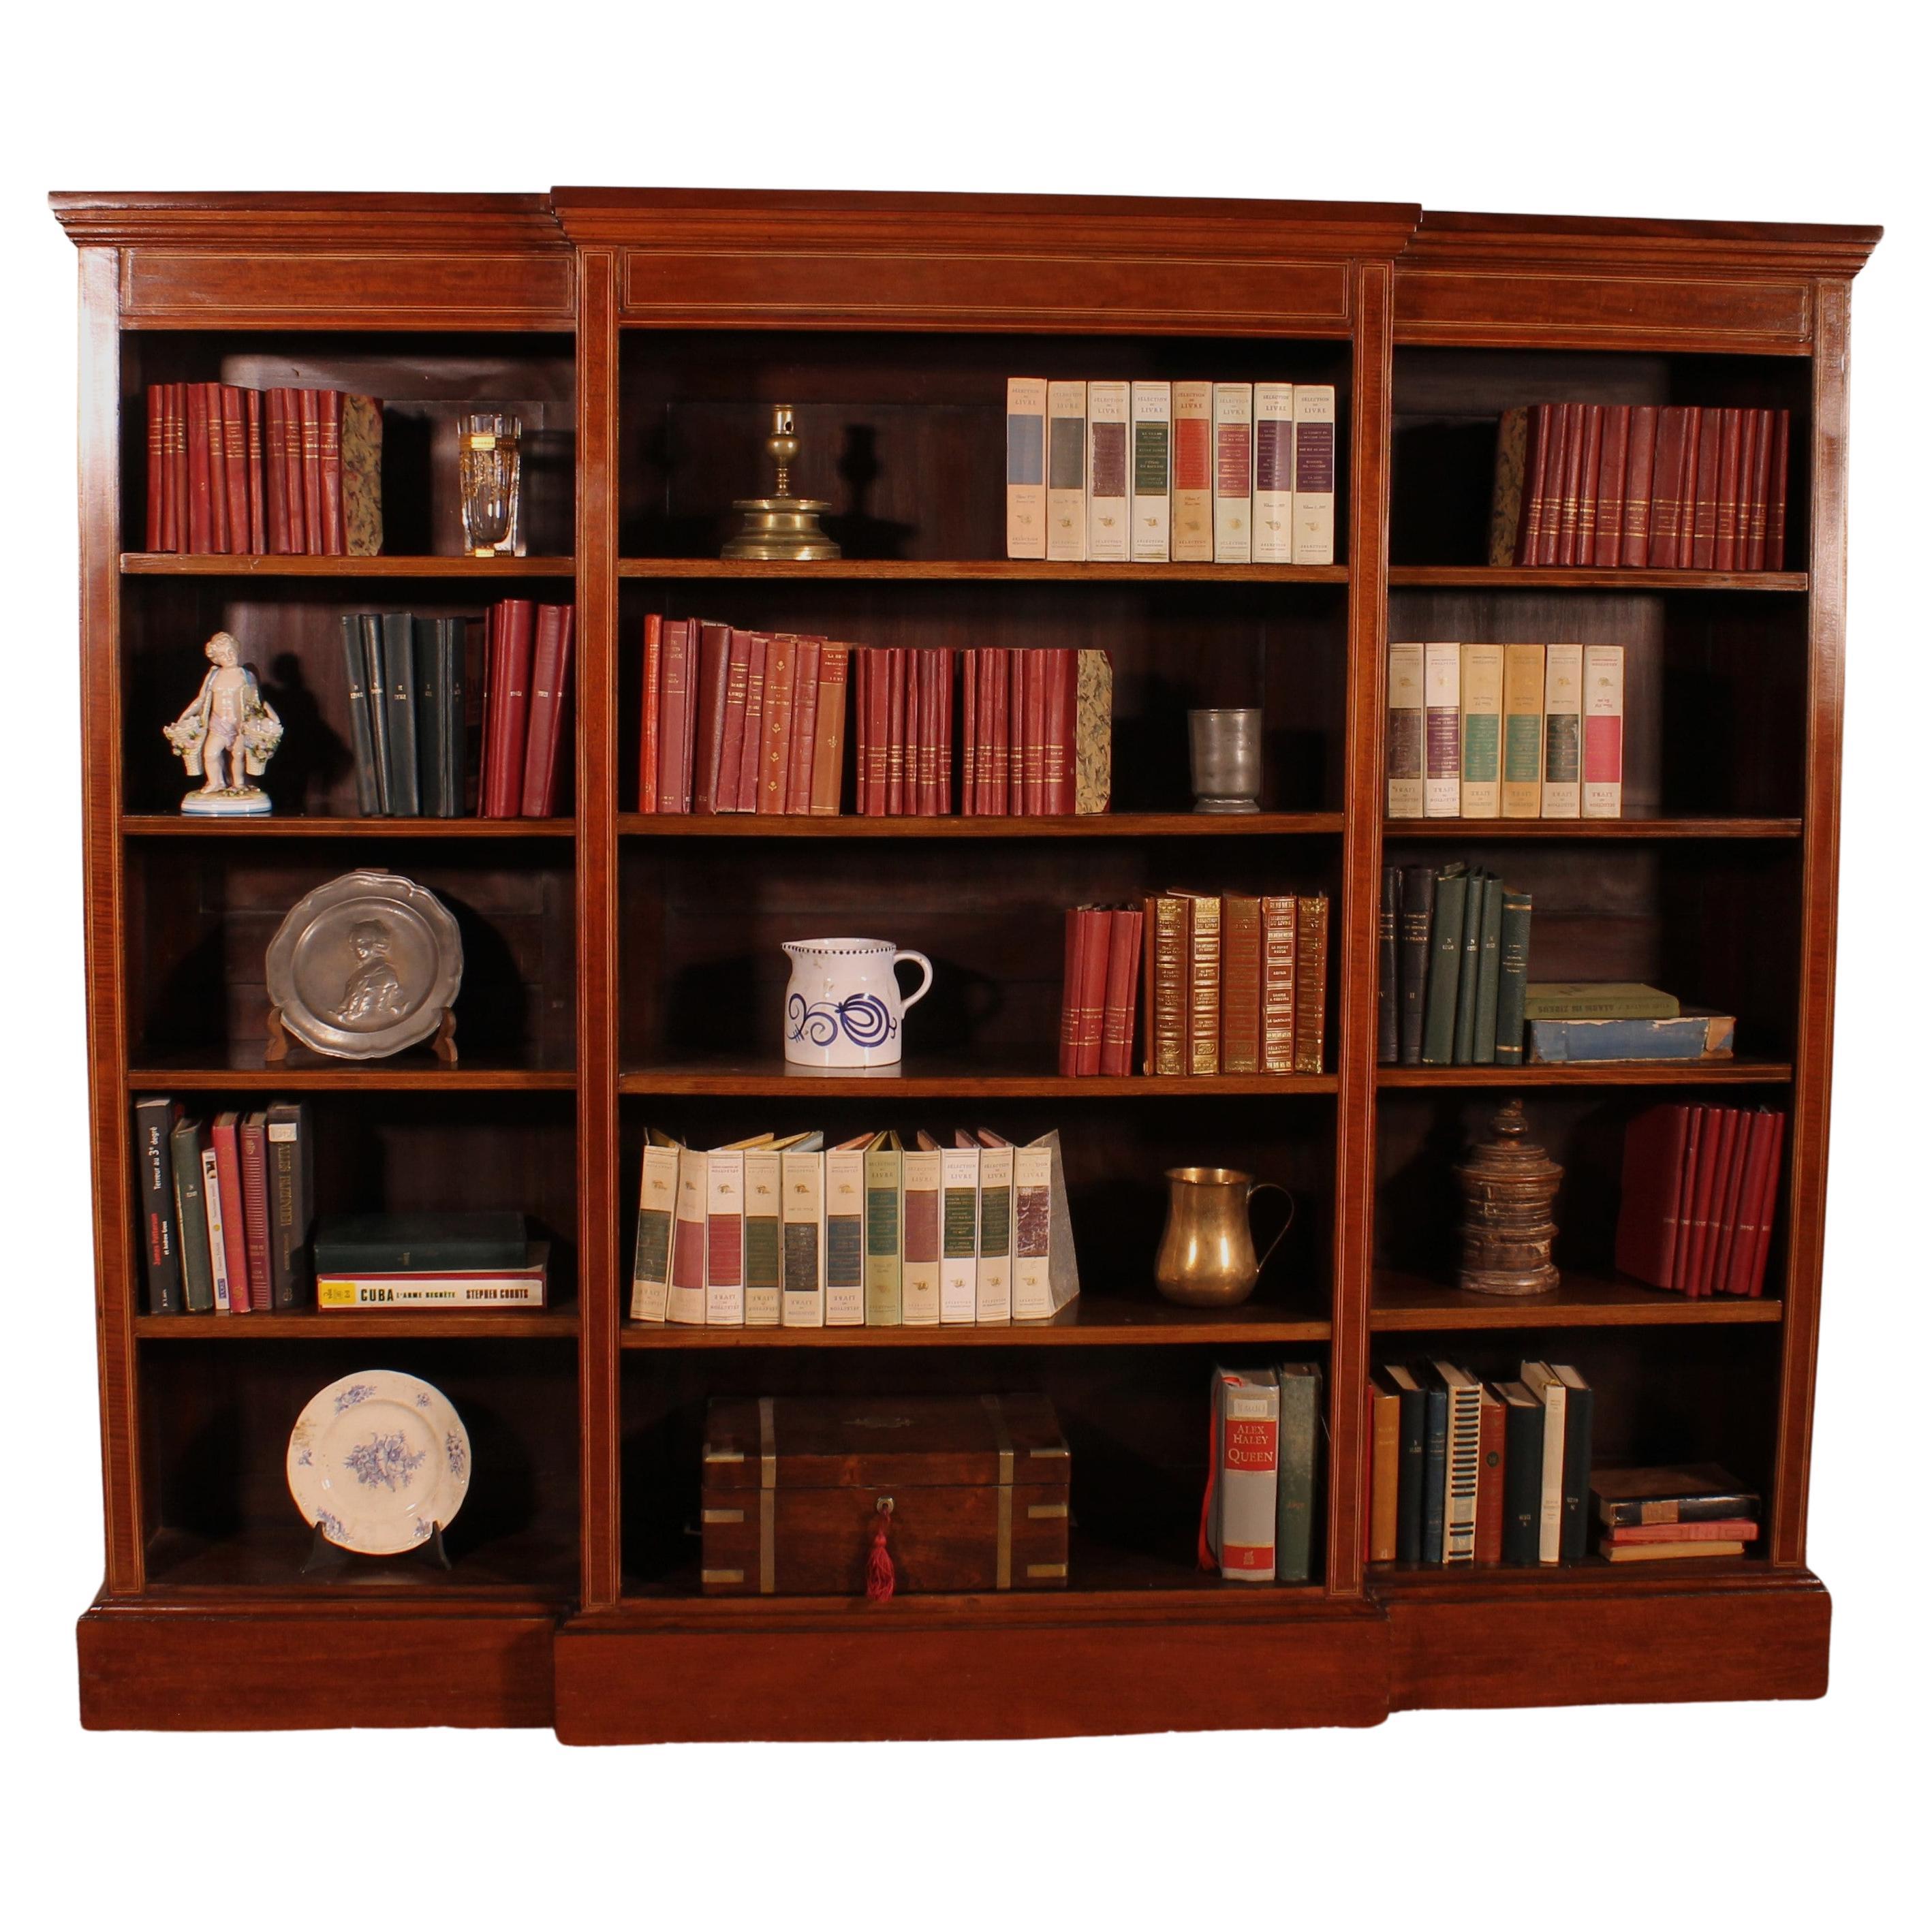 Large Open Bookcase in Mahogany from the 19th Century